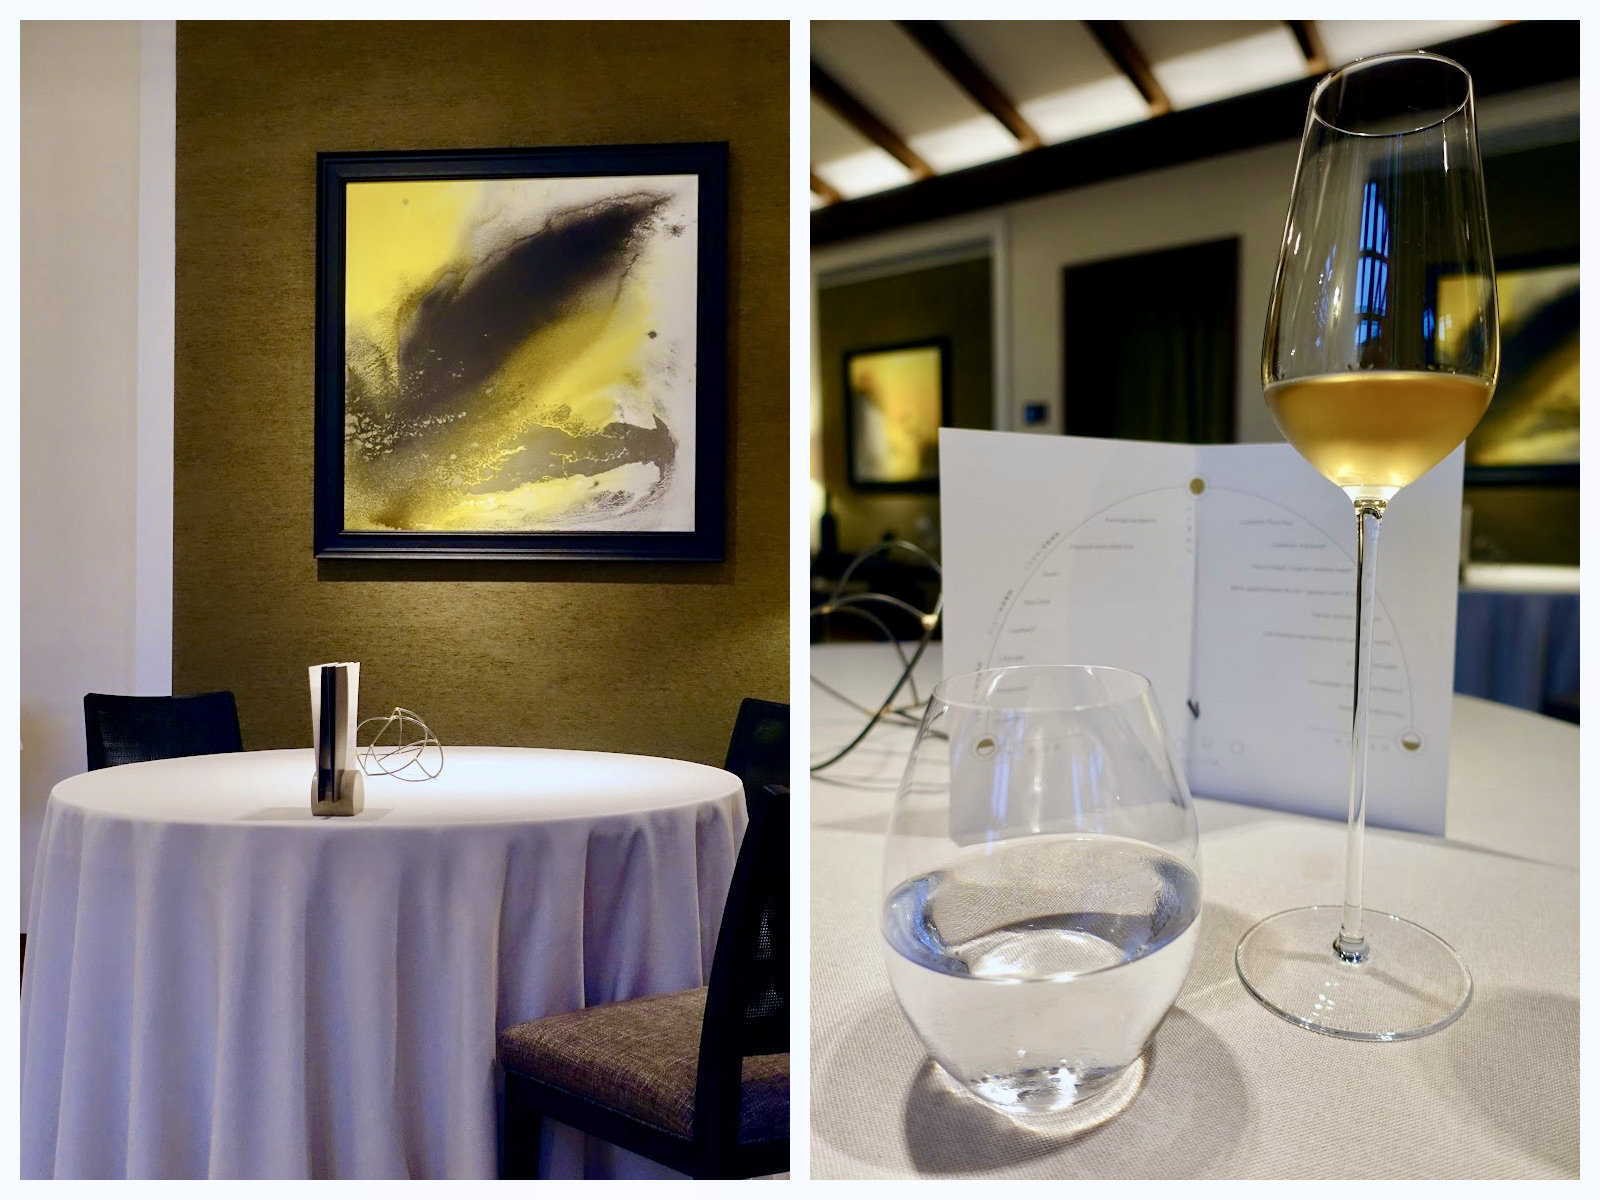 2-star Michelin Restaurant Voro - staying & dining in style in Mallorca/Spain